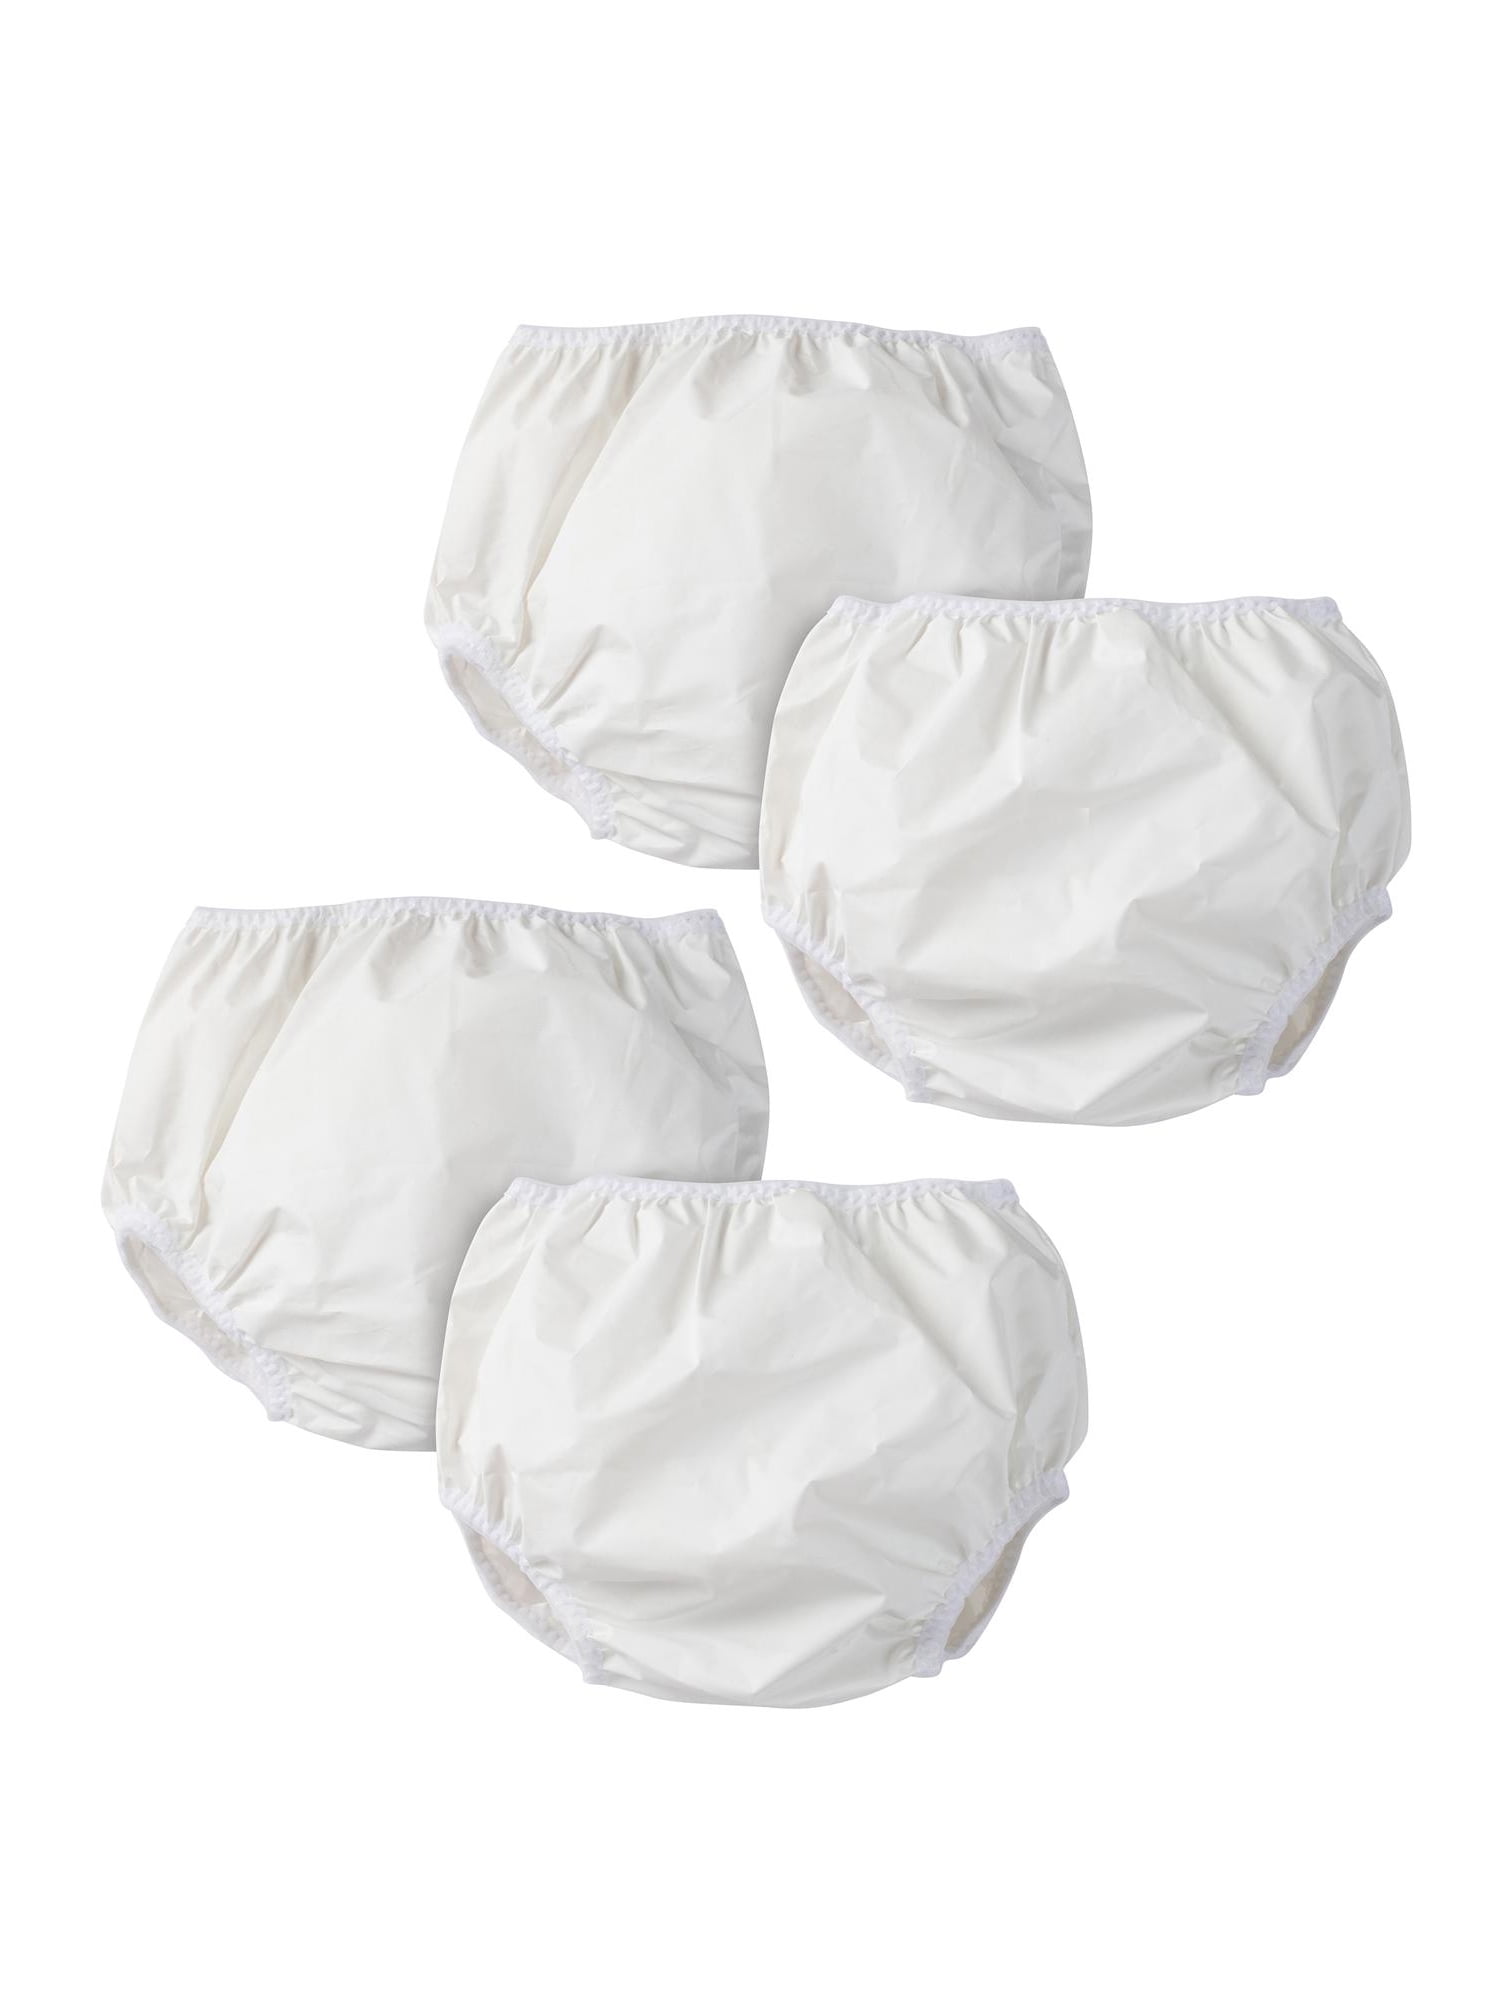  Gerber Potty Training Pants White 2T (3-pack) : Clothing, Shoes  & Jewelry